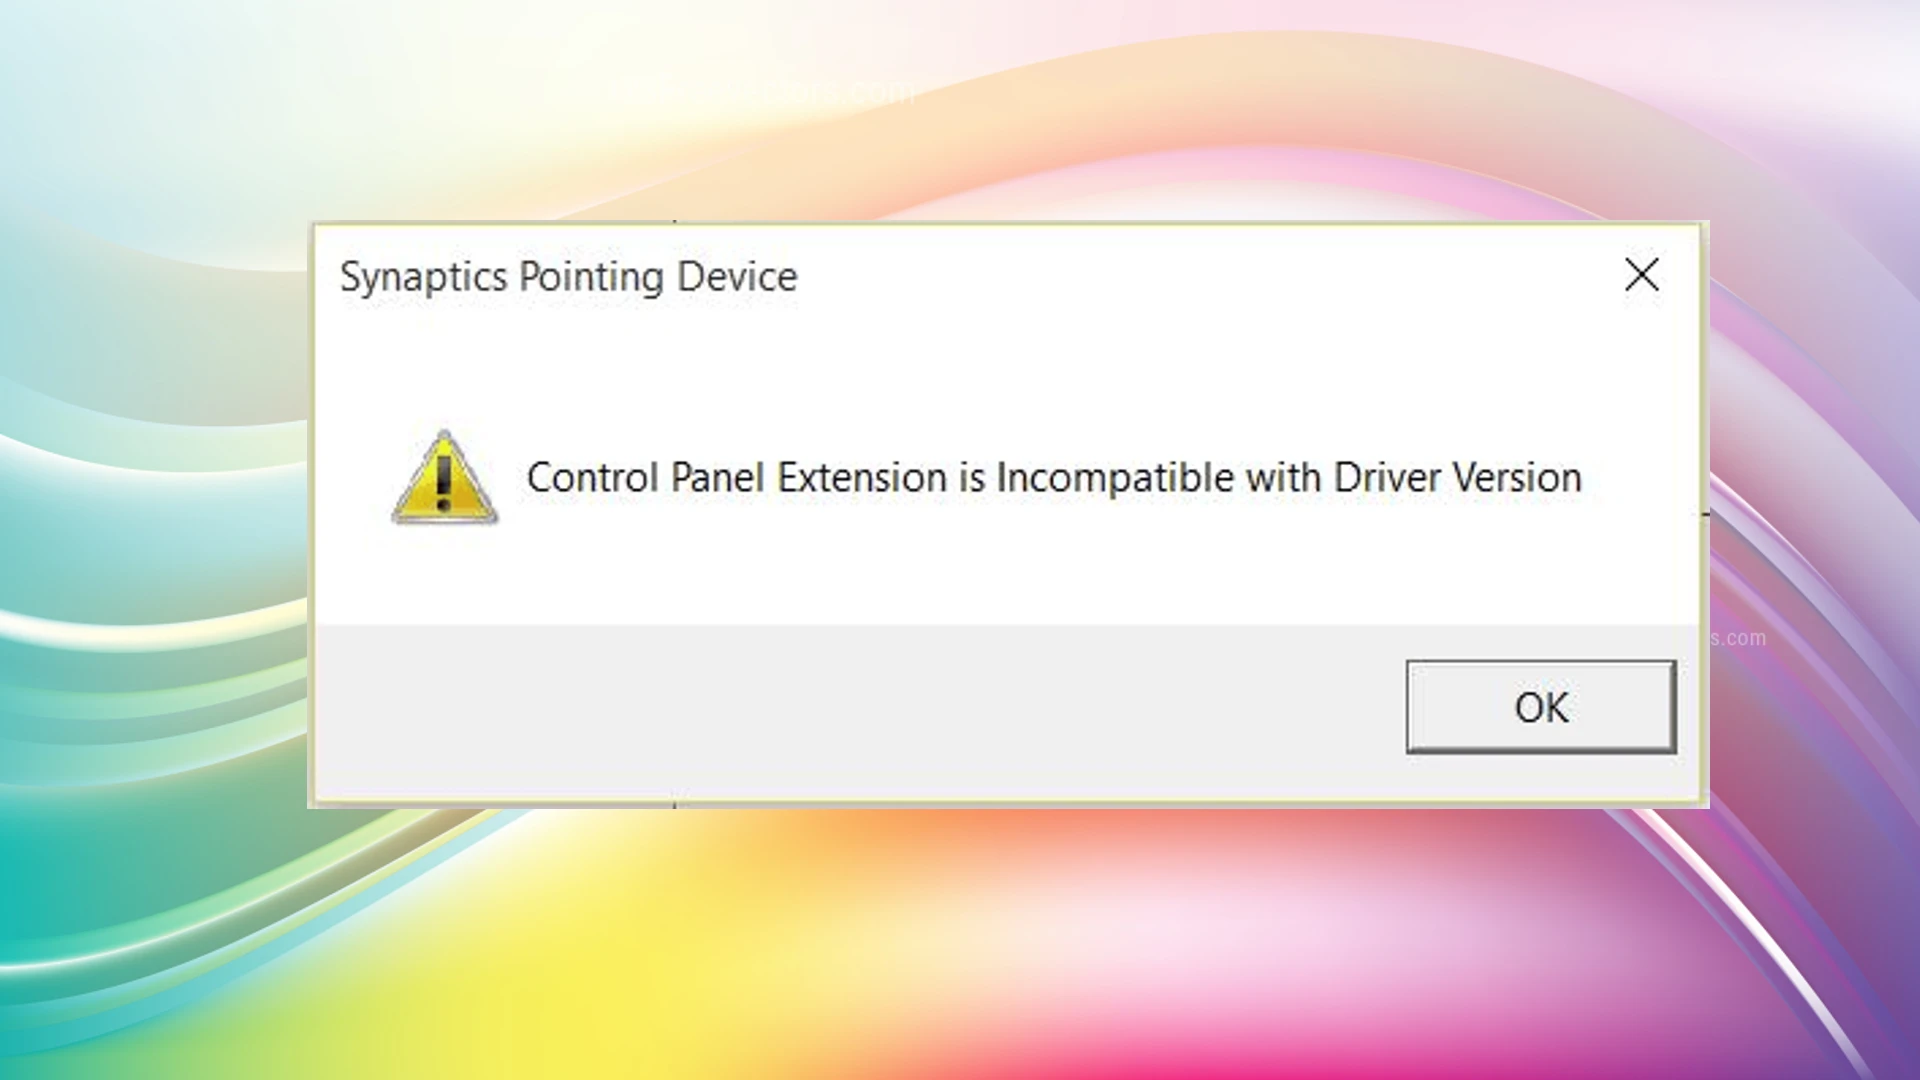 Control Panel Extension is Incompatible with Driver Version